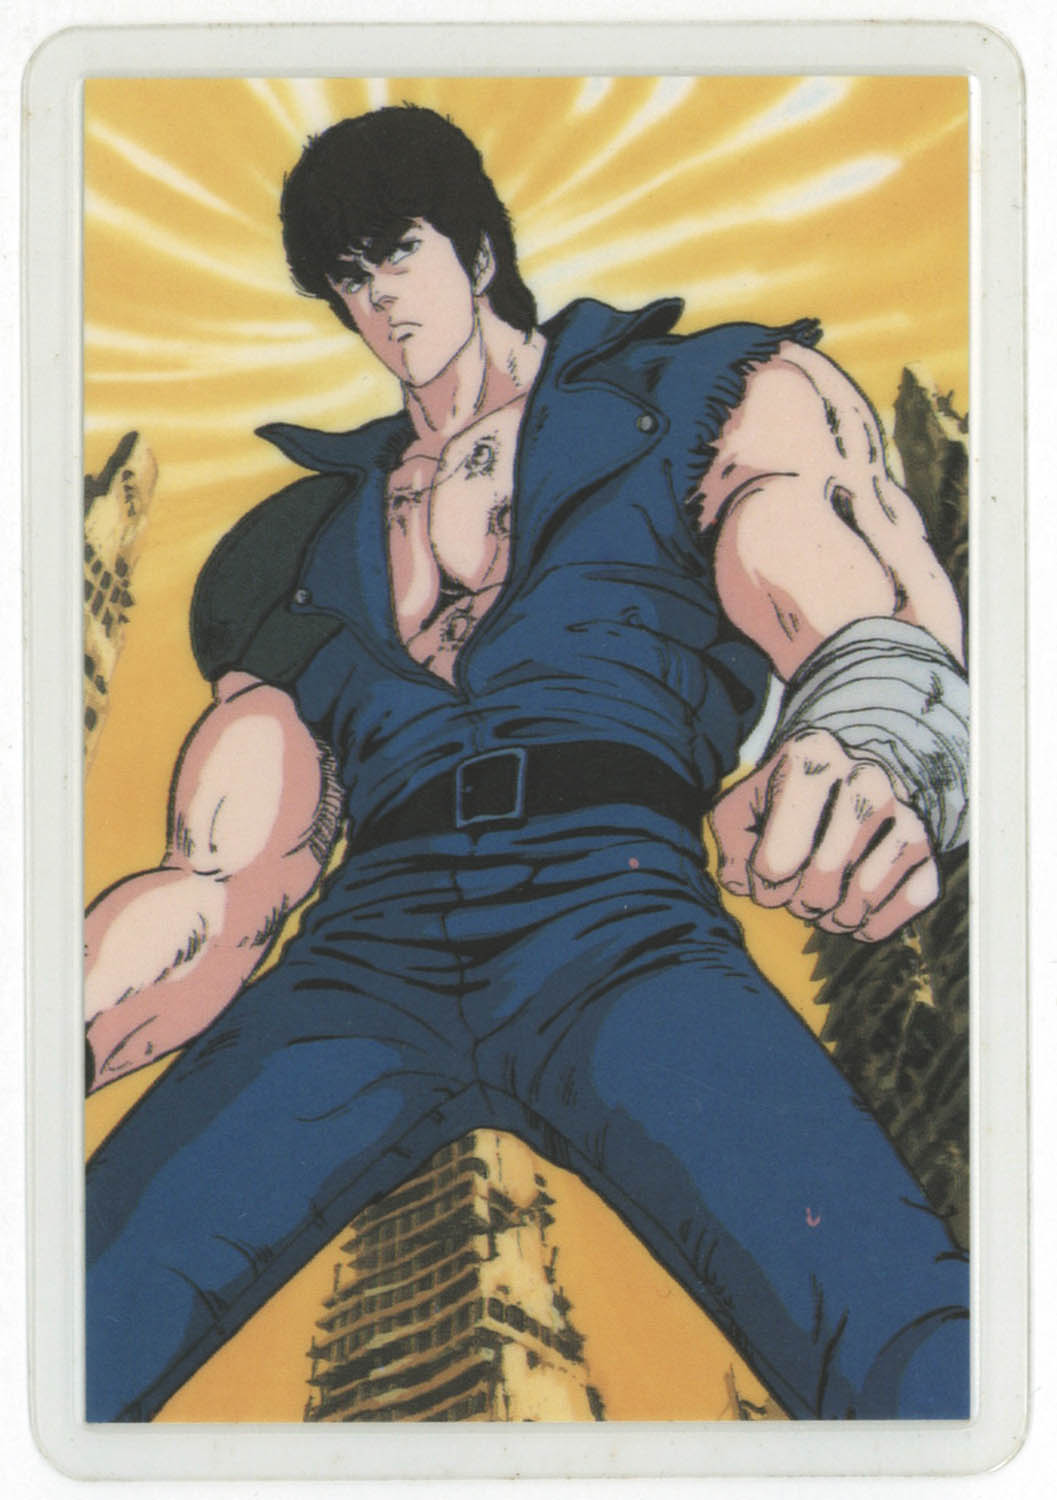 Fist of the North Star Lamica 